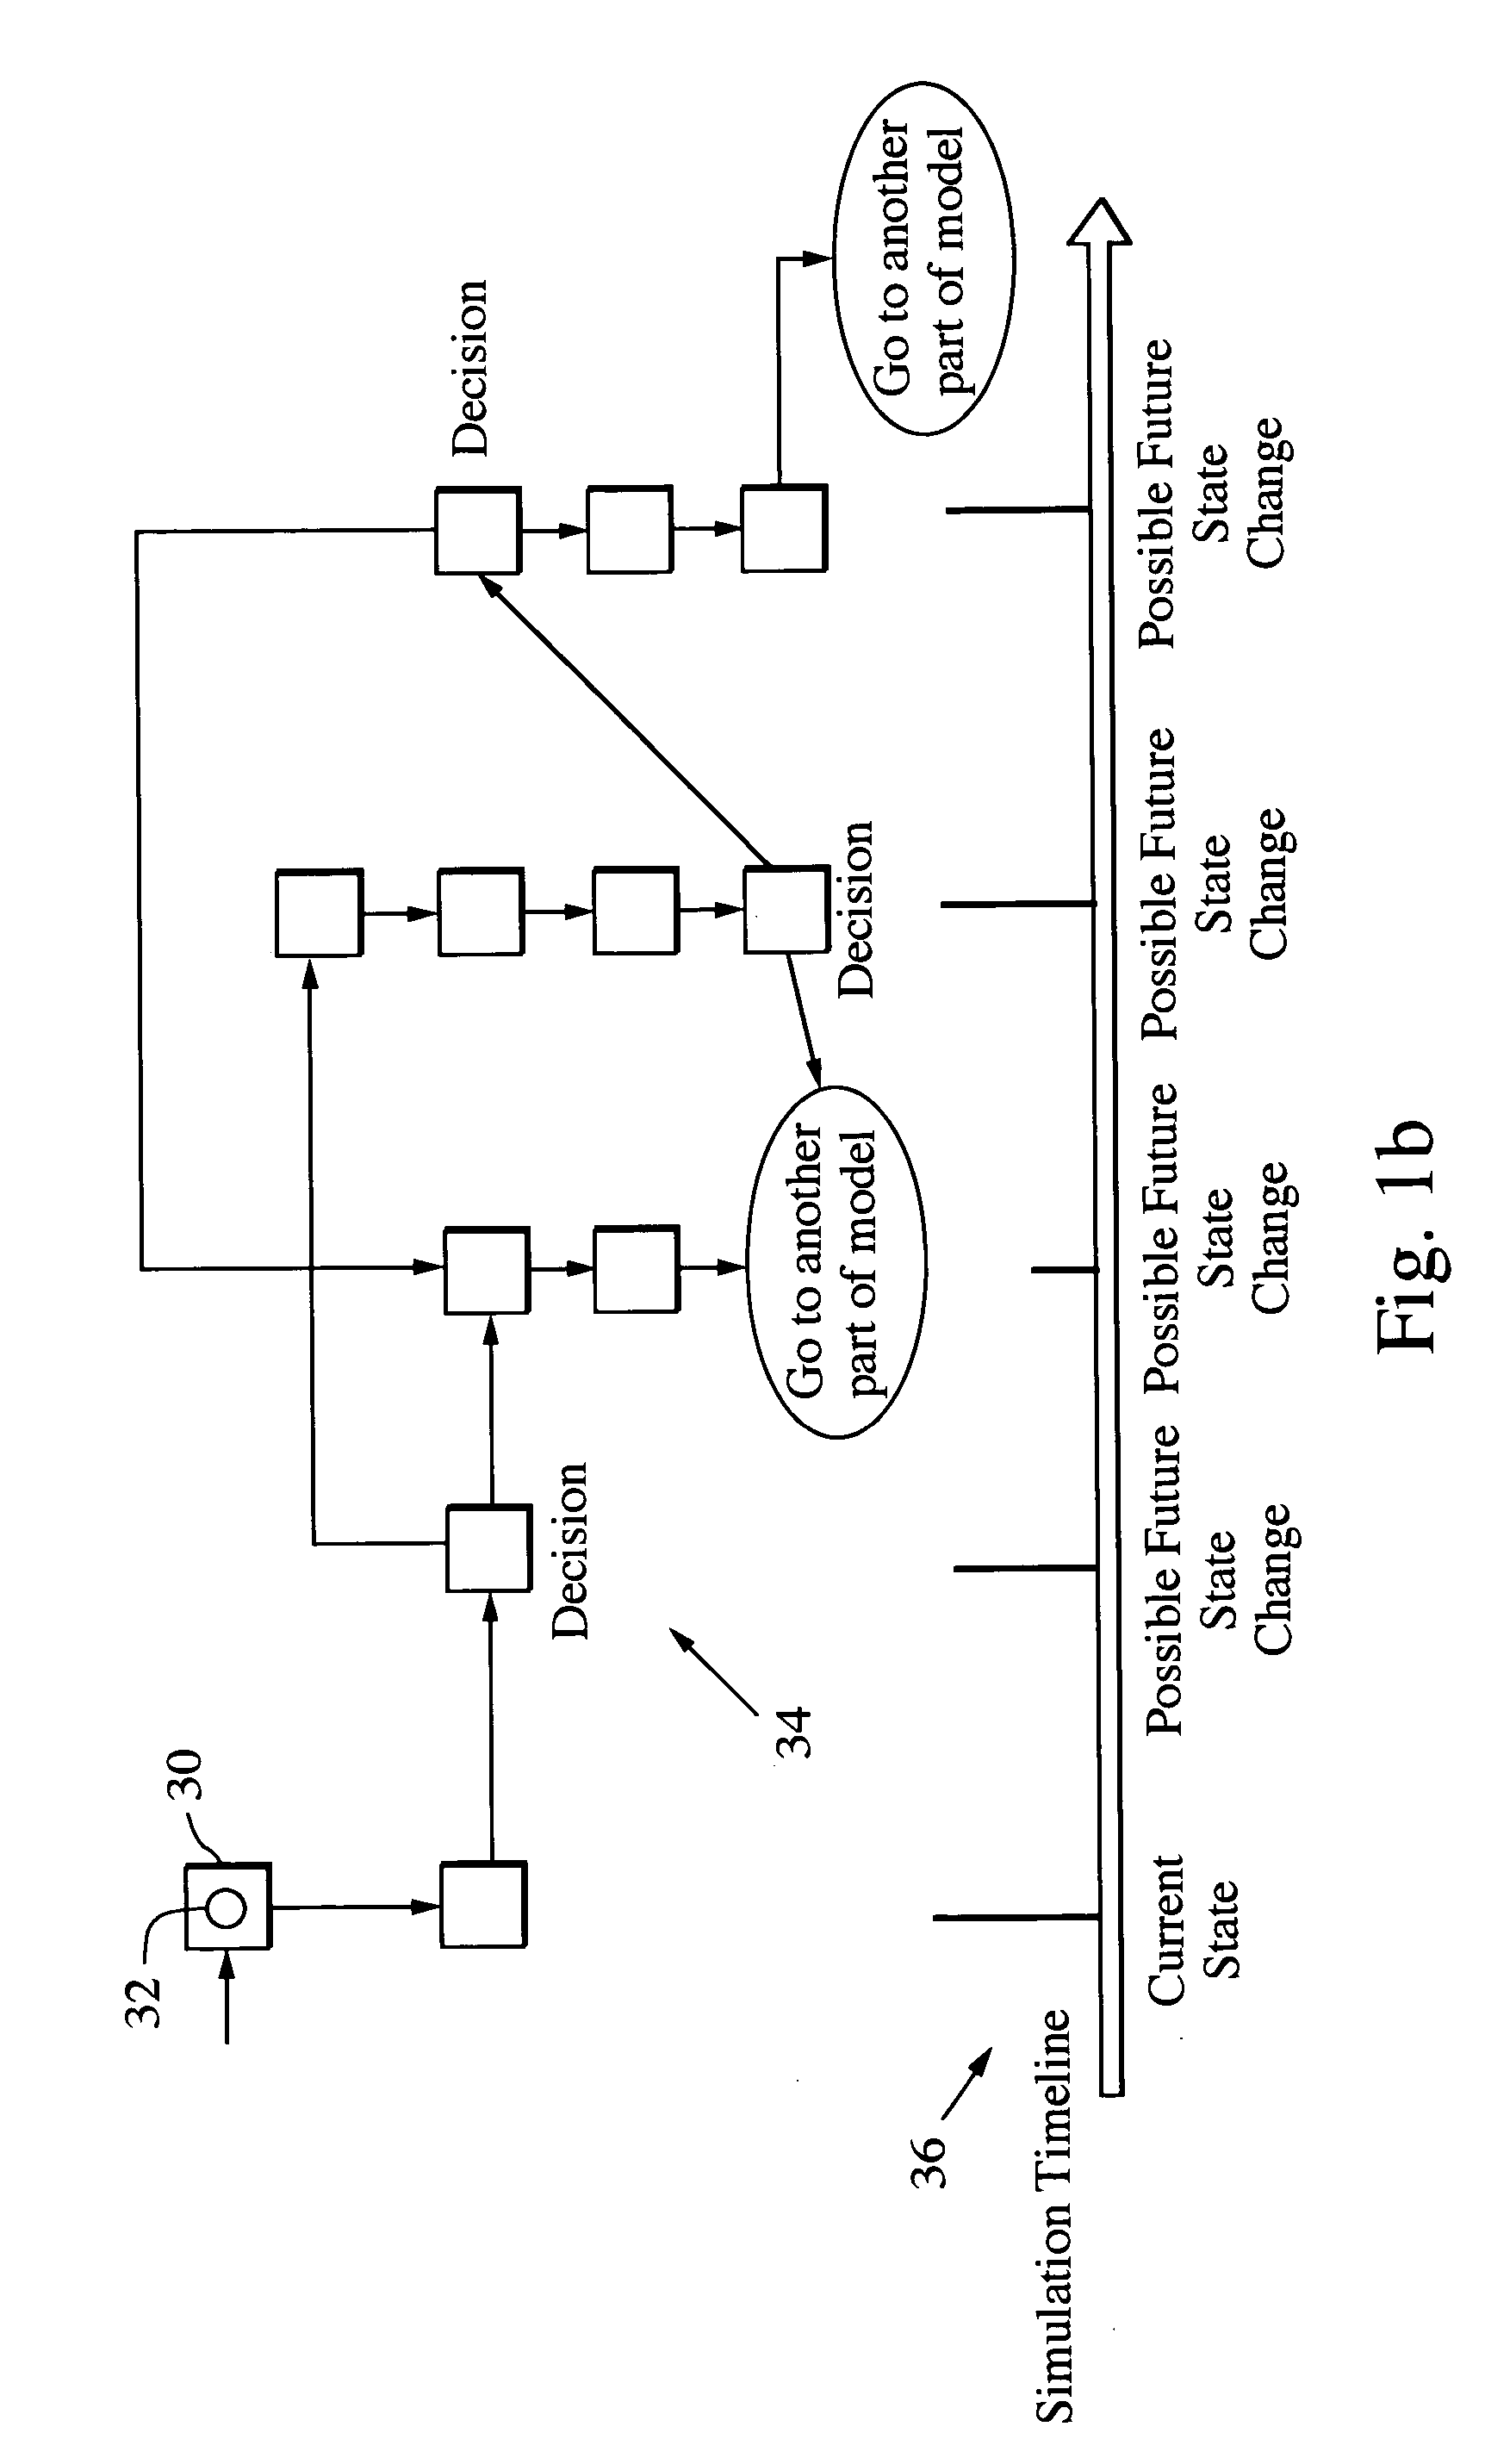 Operations and support discrete event simulation system and method